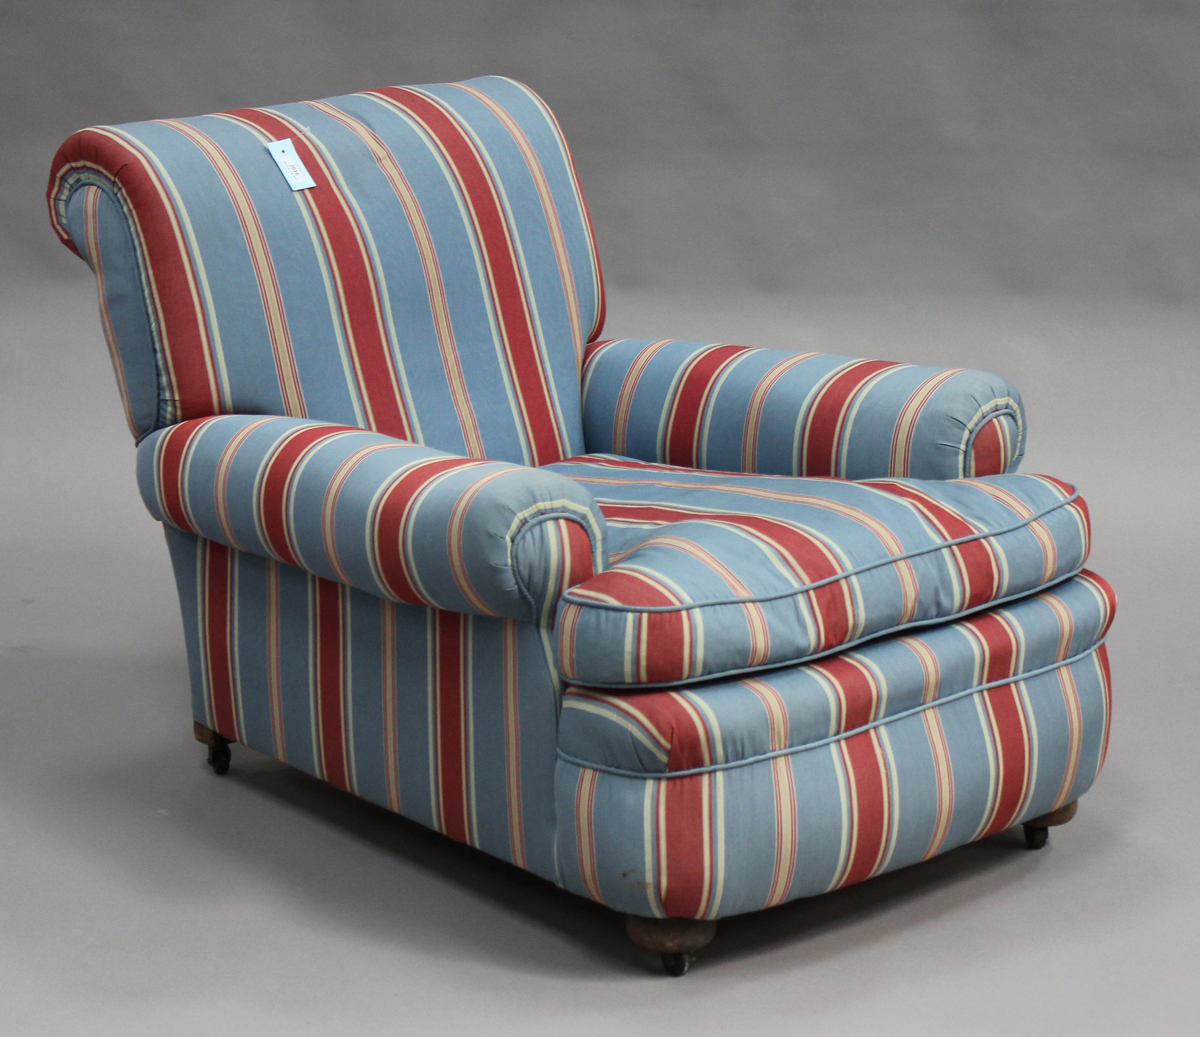 An early 20th century Howard & Sons style scroll armchair, upholstered in blue striped fabric, on